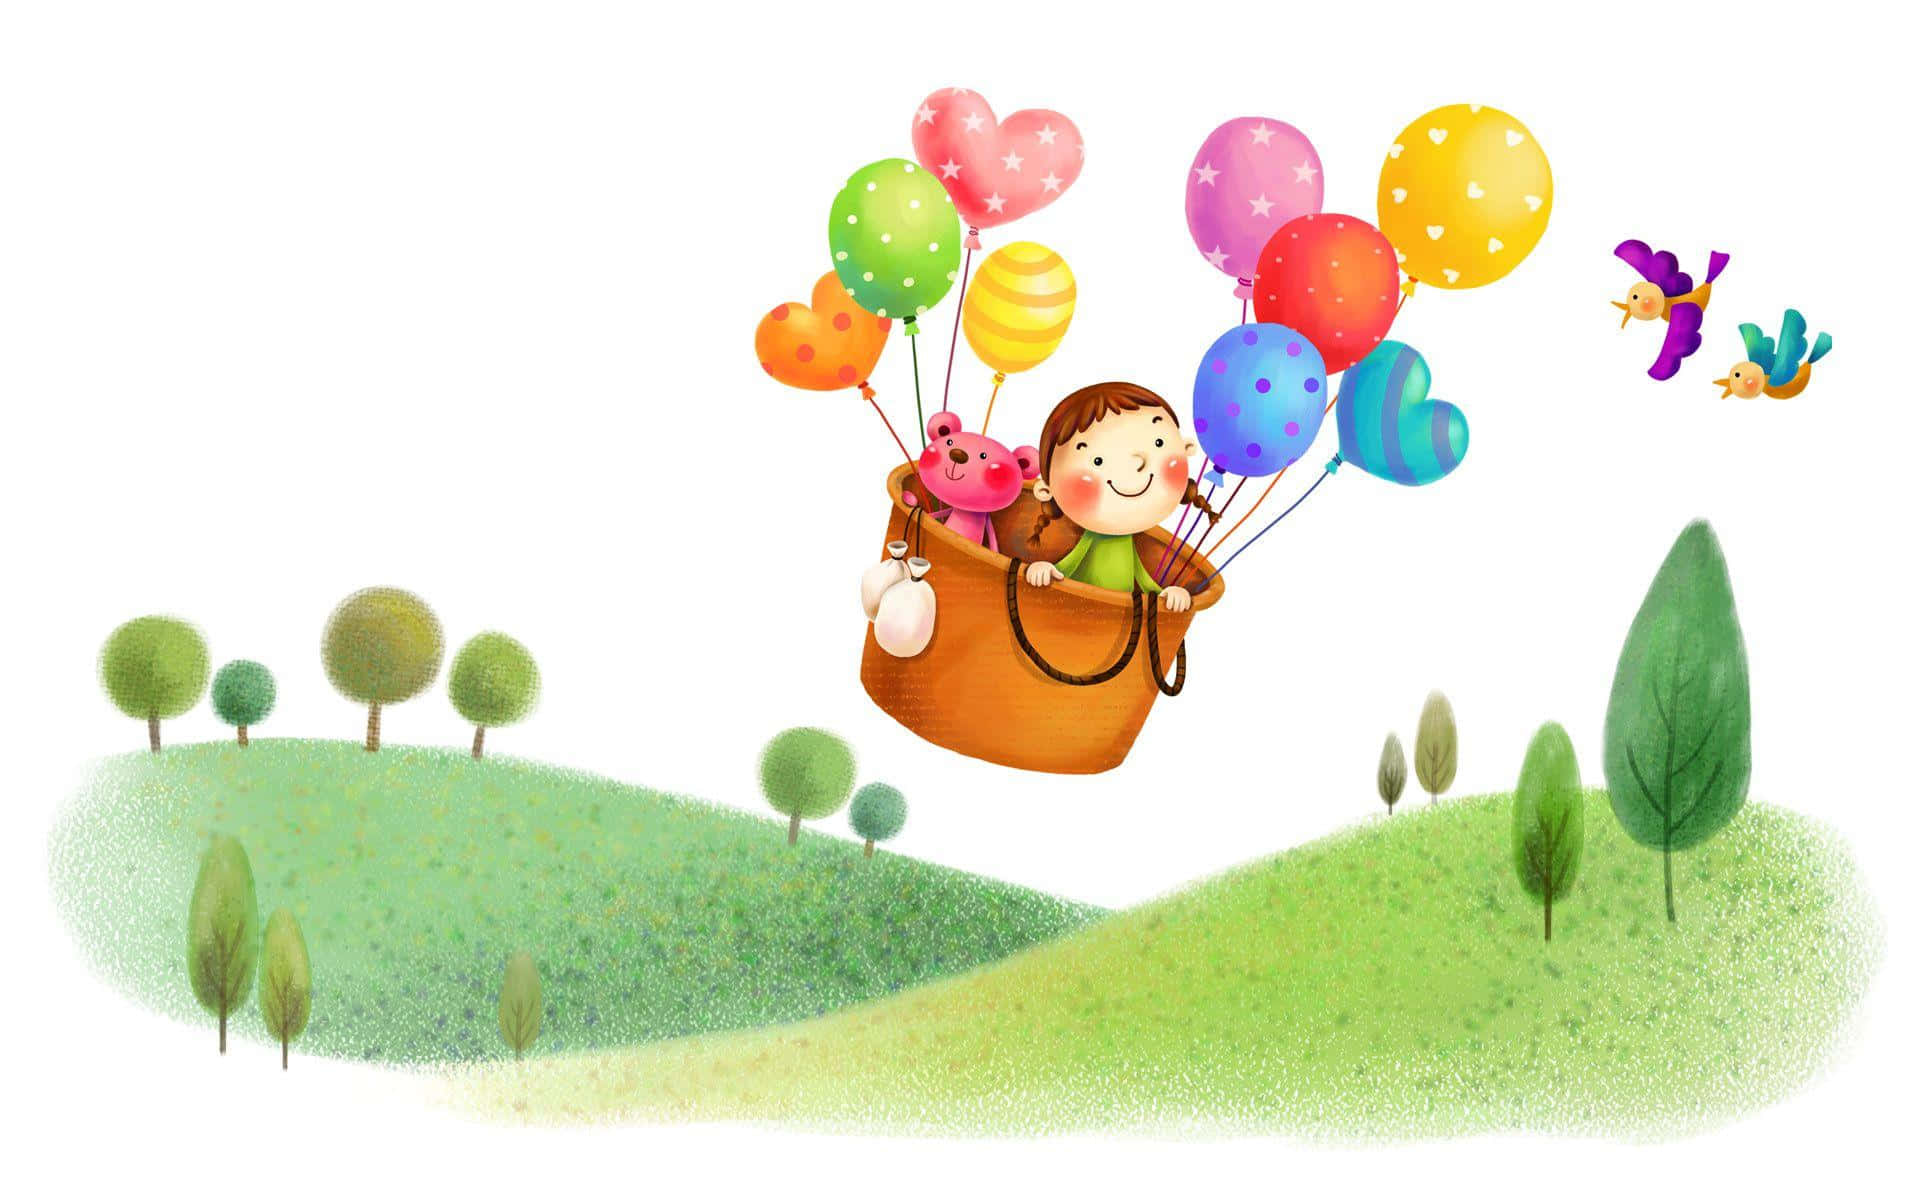 Kids Birthday Background Wallpaper Hd Top HD Images For Free - Essence of  Communication